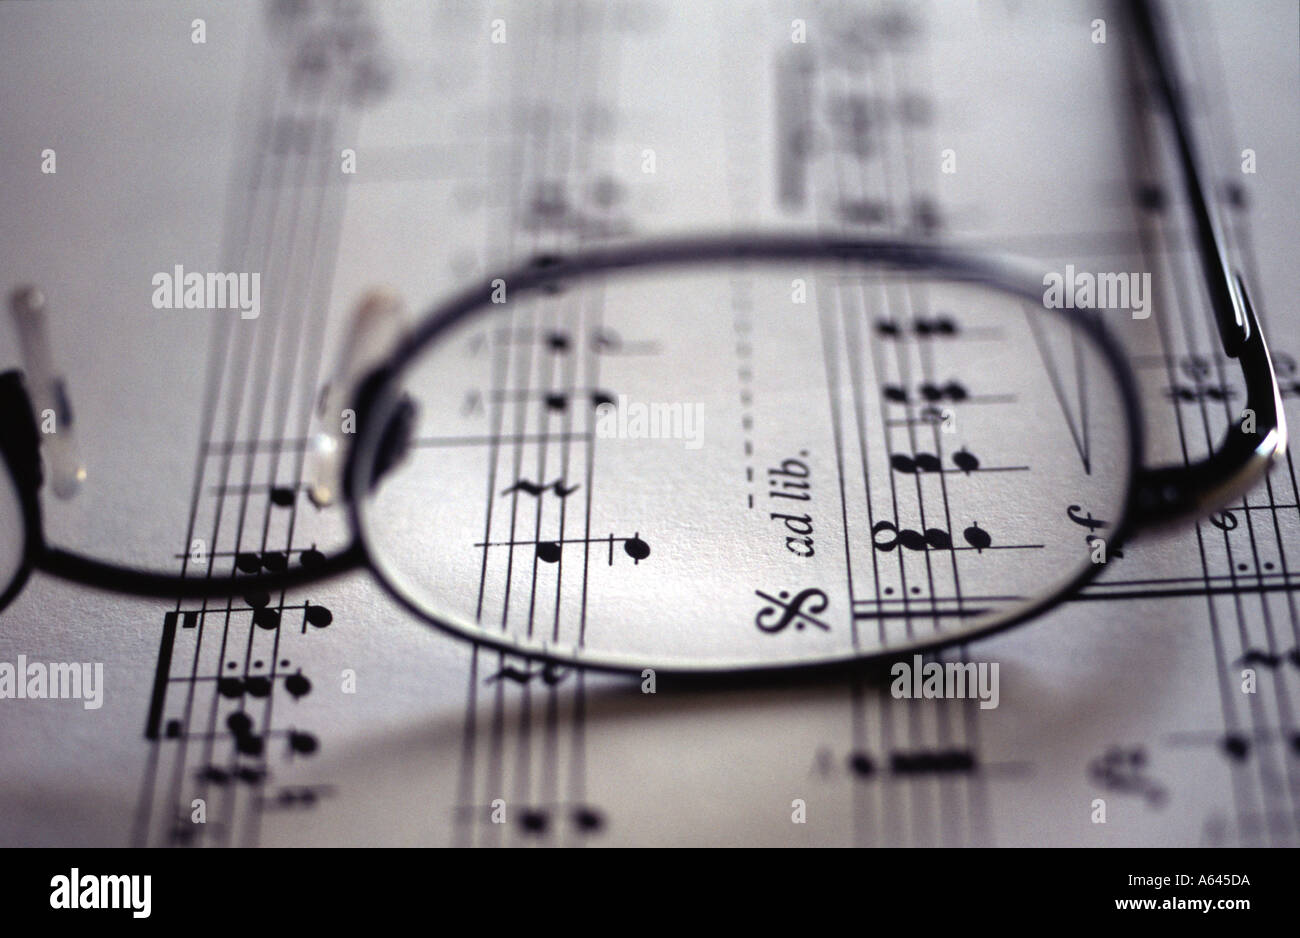 Spectacles resting on a piece of manuscript Stock Photo